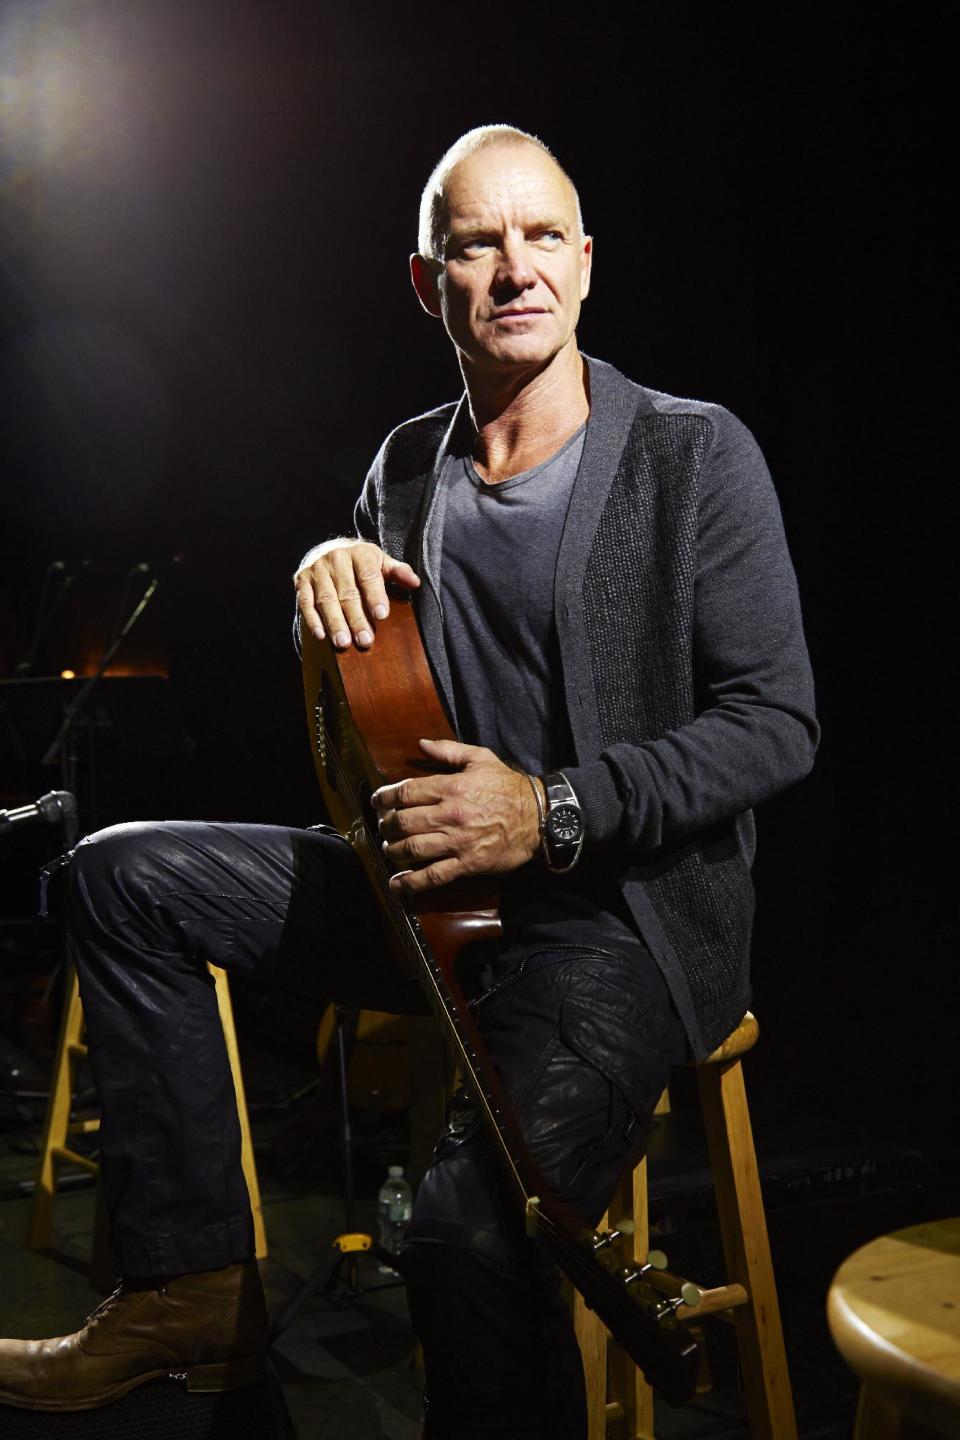 In this Sept. 26, 2013, photo, Sting poses for a portrait at The Public Theater in promotion of his new album, "The Last Ship," in New York. (Photo by Dan Hallman/Invision/AP)